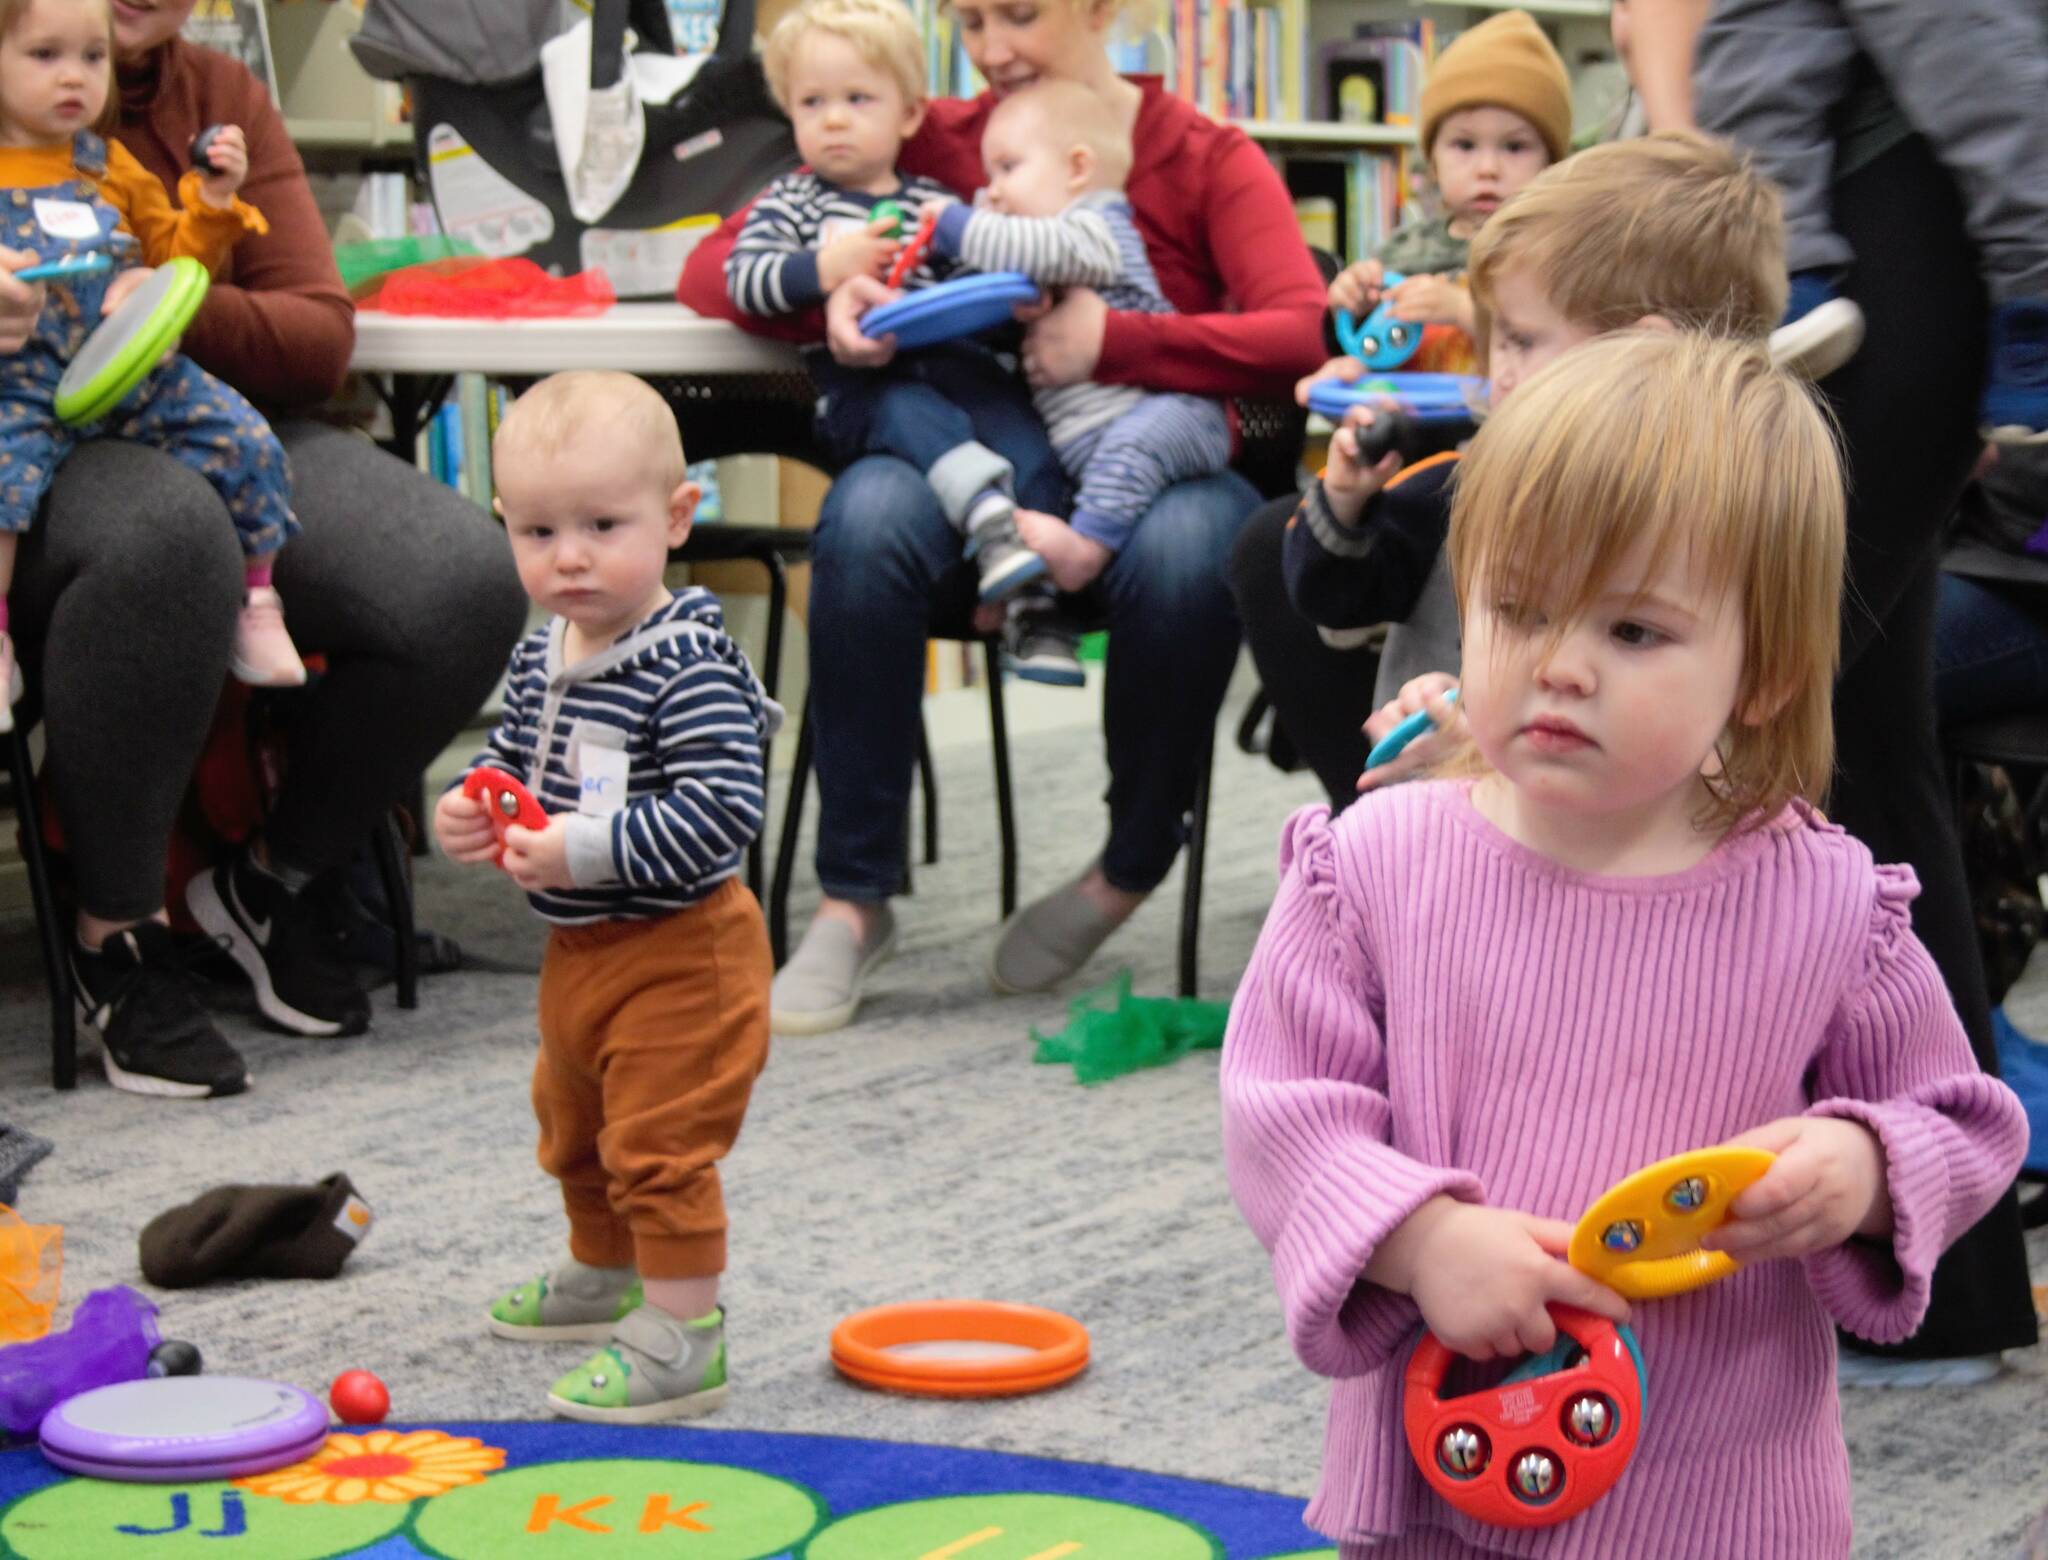 A toddler watches the librarian do actions for a song while catching the eyes of another youngster.